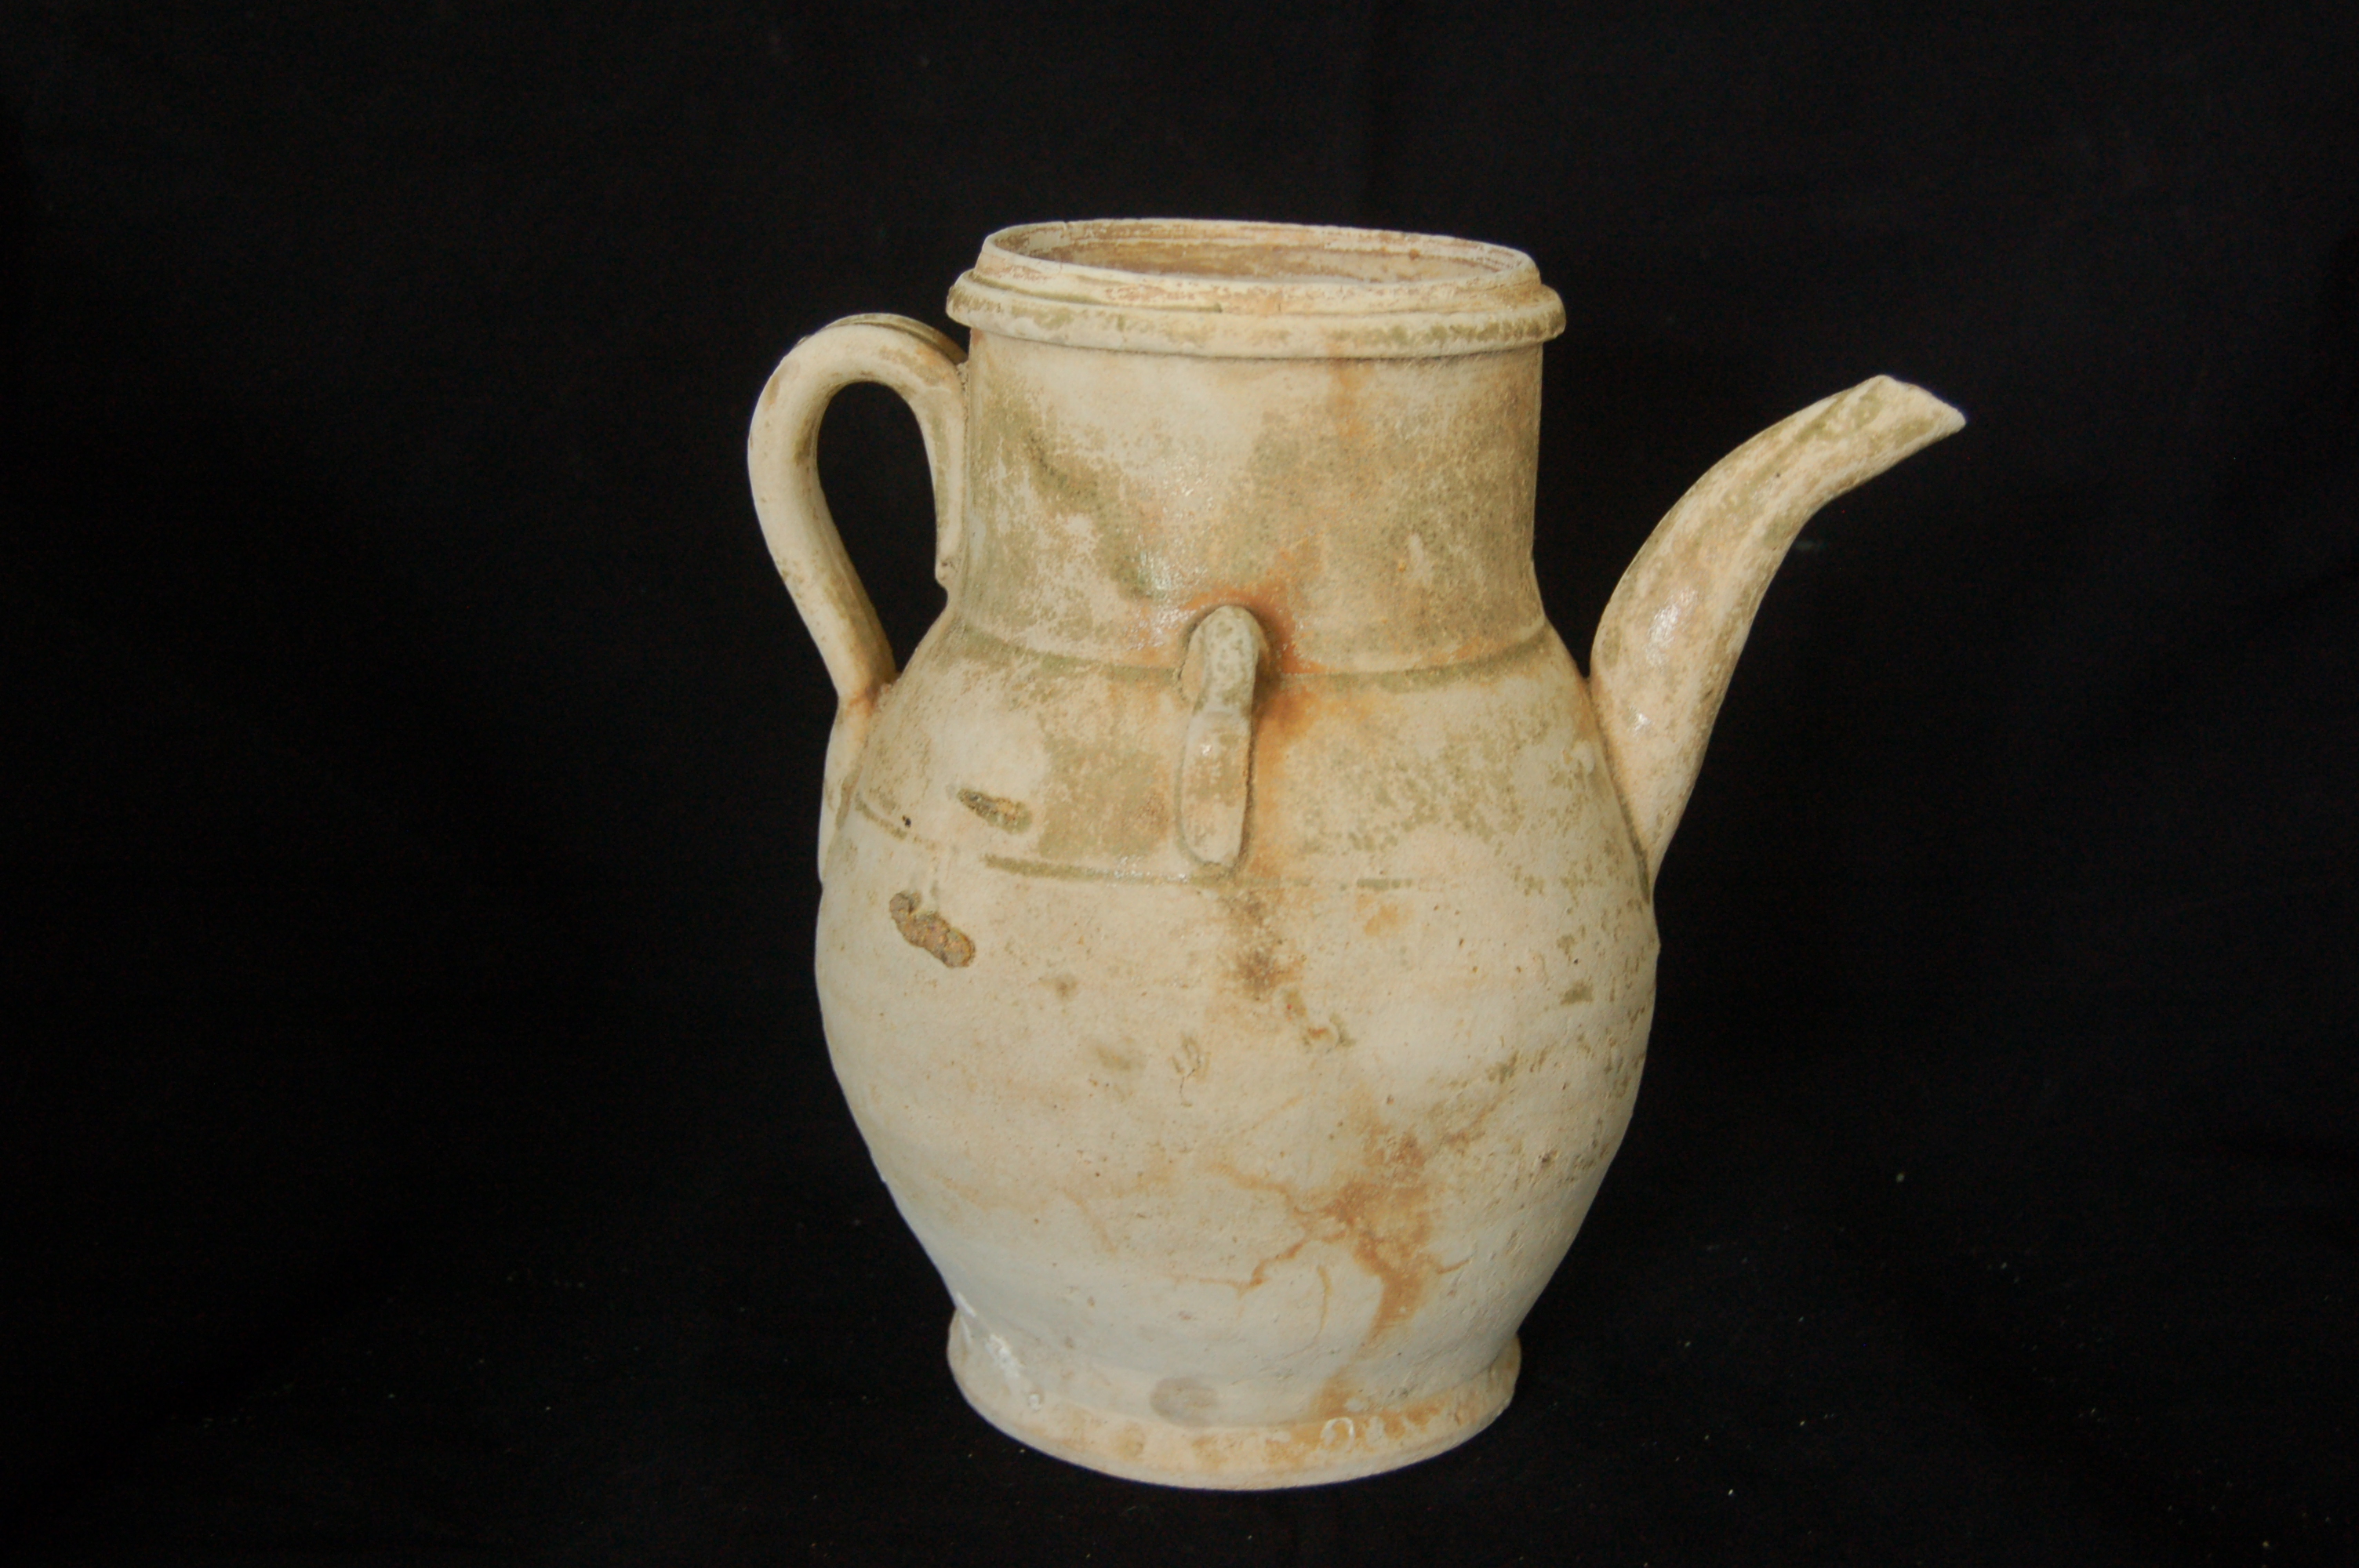 Ewer with a wide straight neck, flanged mouth-rim, curved spout and strap handle, with ear-handles high on the shoulder in between. The foot is flared with a flat base. Diameter 14 cm, height 19.5 cm.